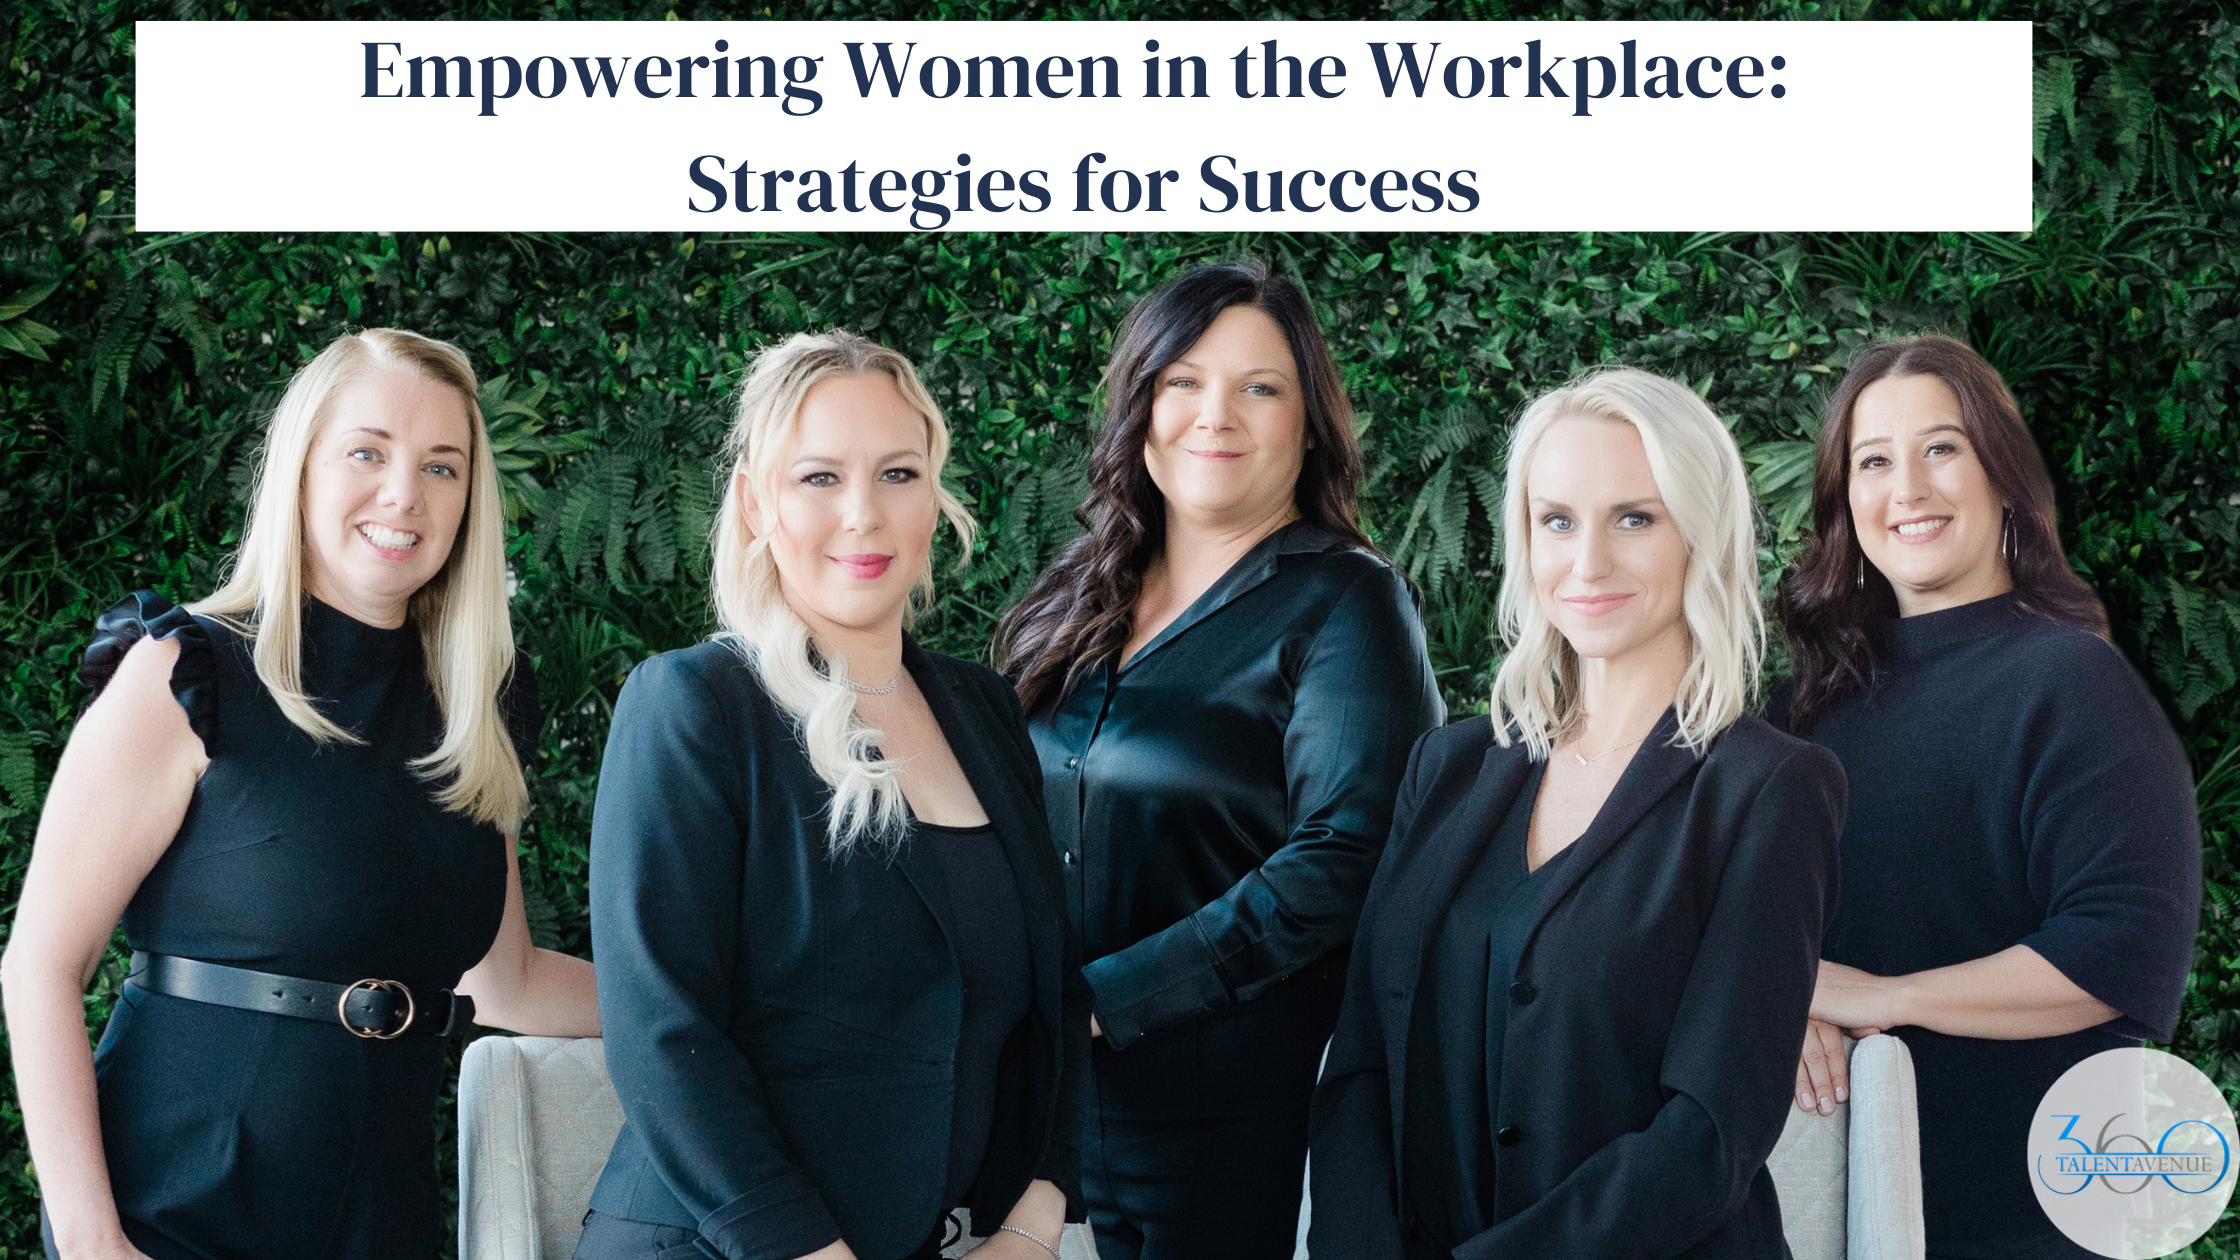 Empowering Women in the workplace